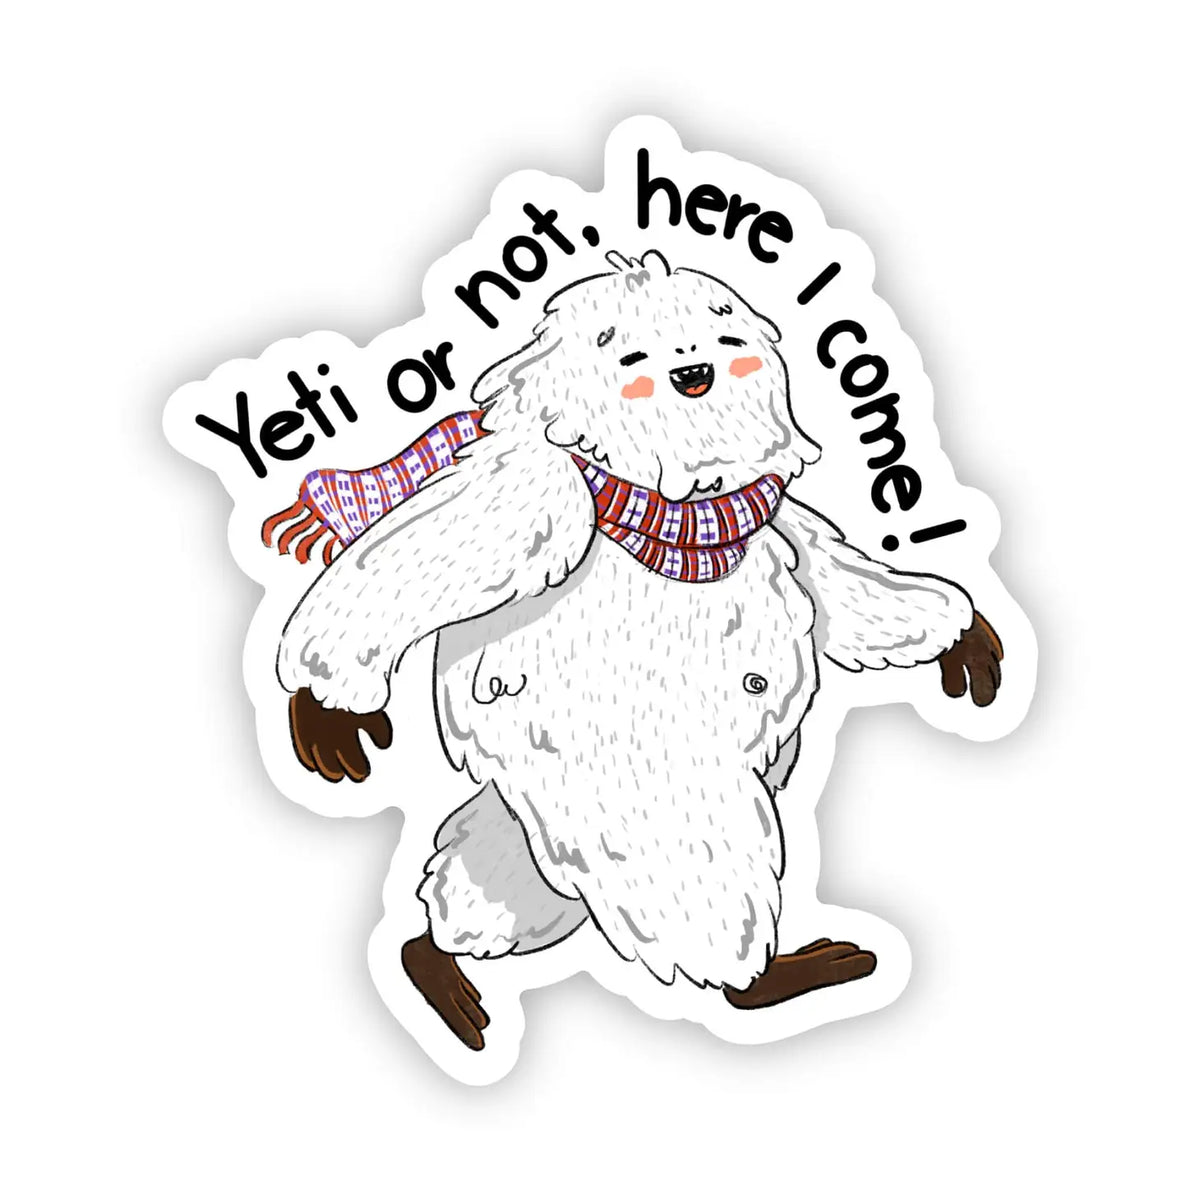 "Yeti or Not, Here I Come" Sticker